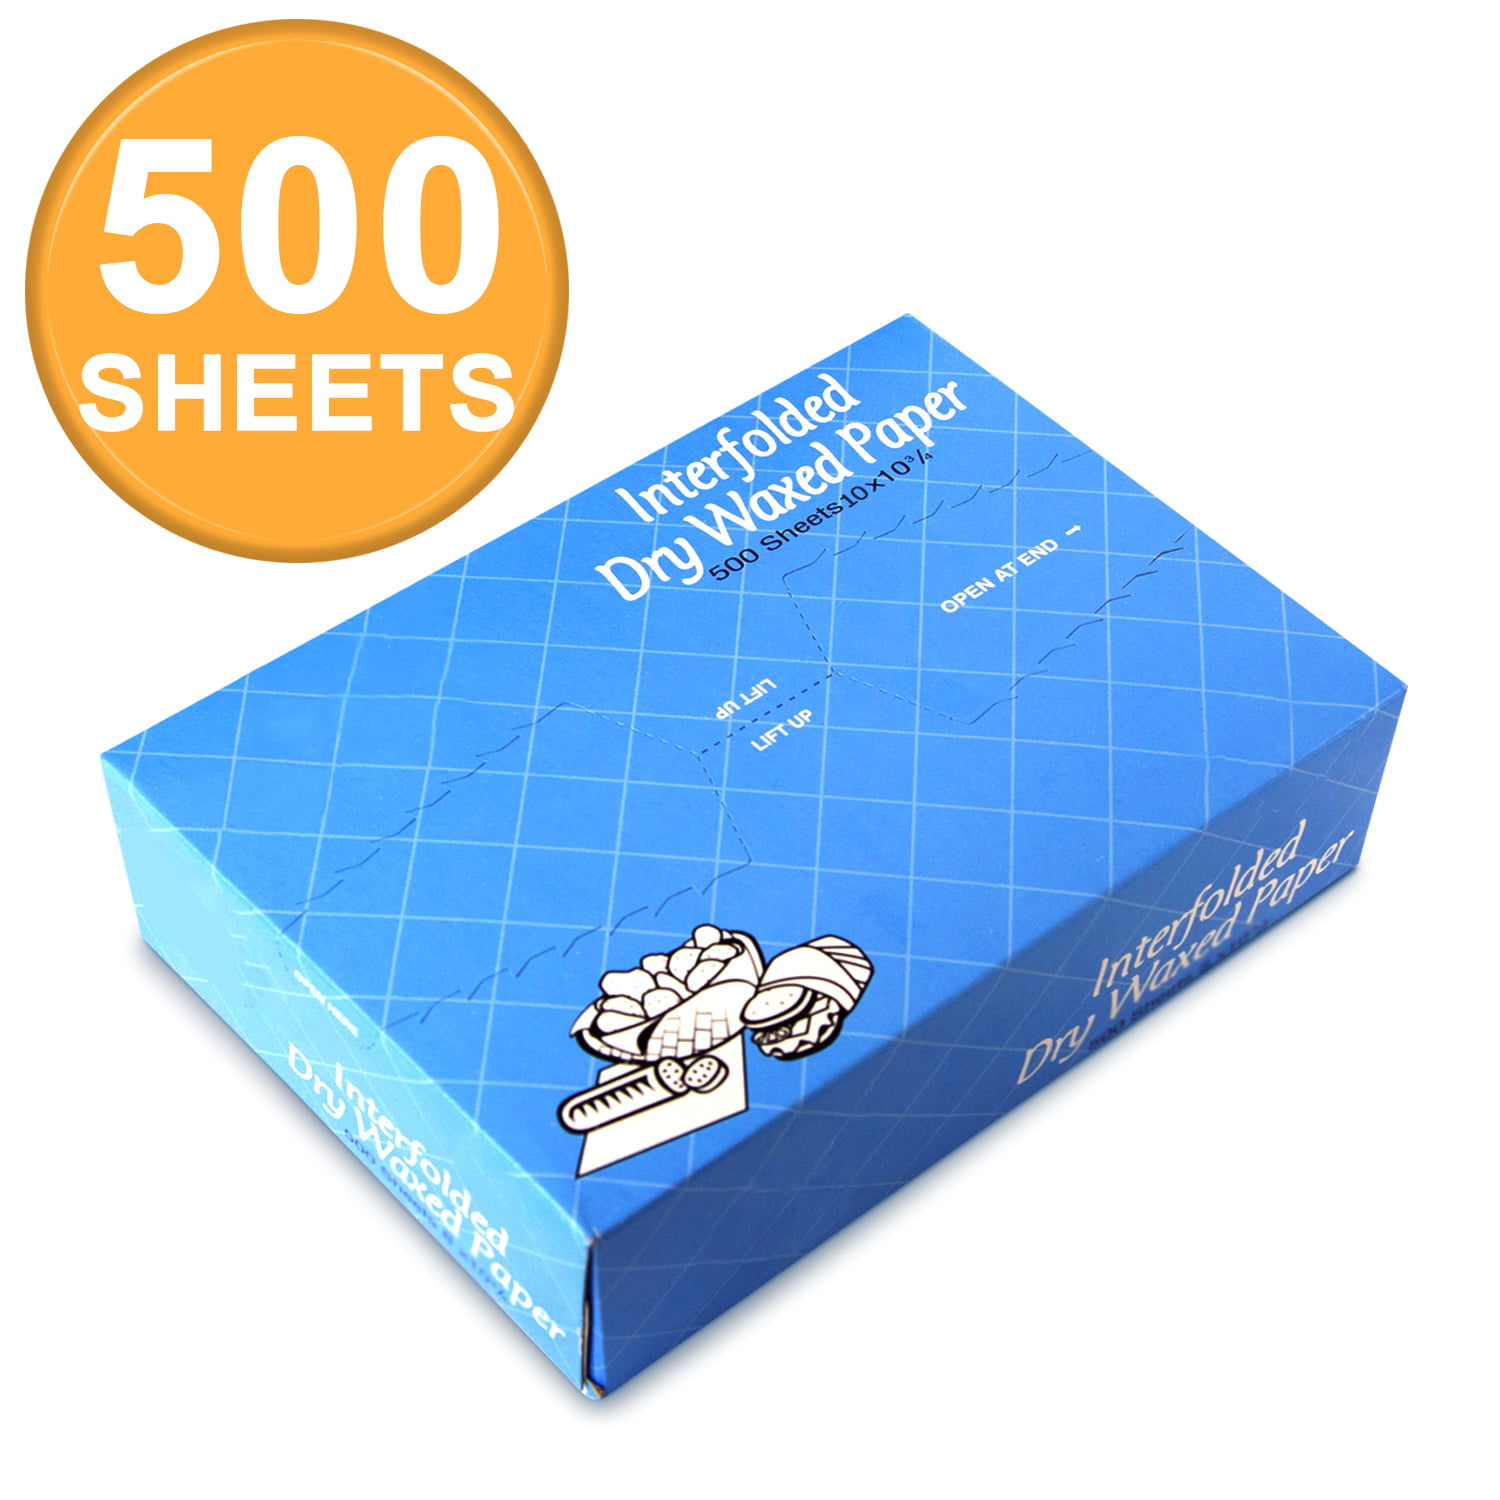 Dry Wax Paper Sheets - 14x14 | RubenRestSupply